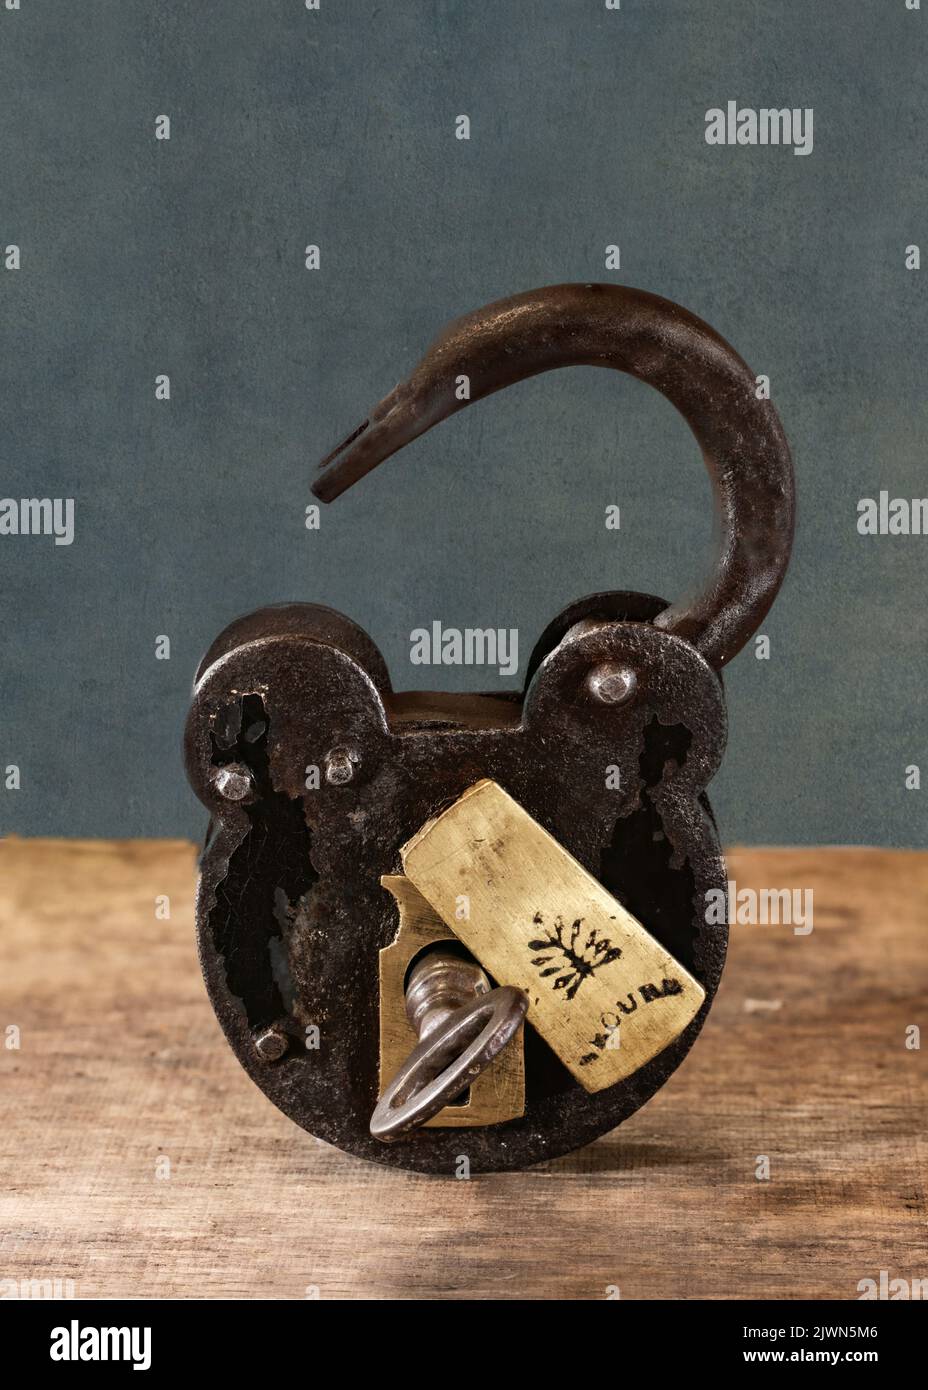 A close up still life image of an old fashioned padlock and key in the open position Stock Photo